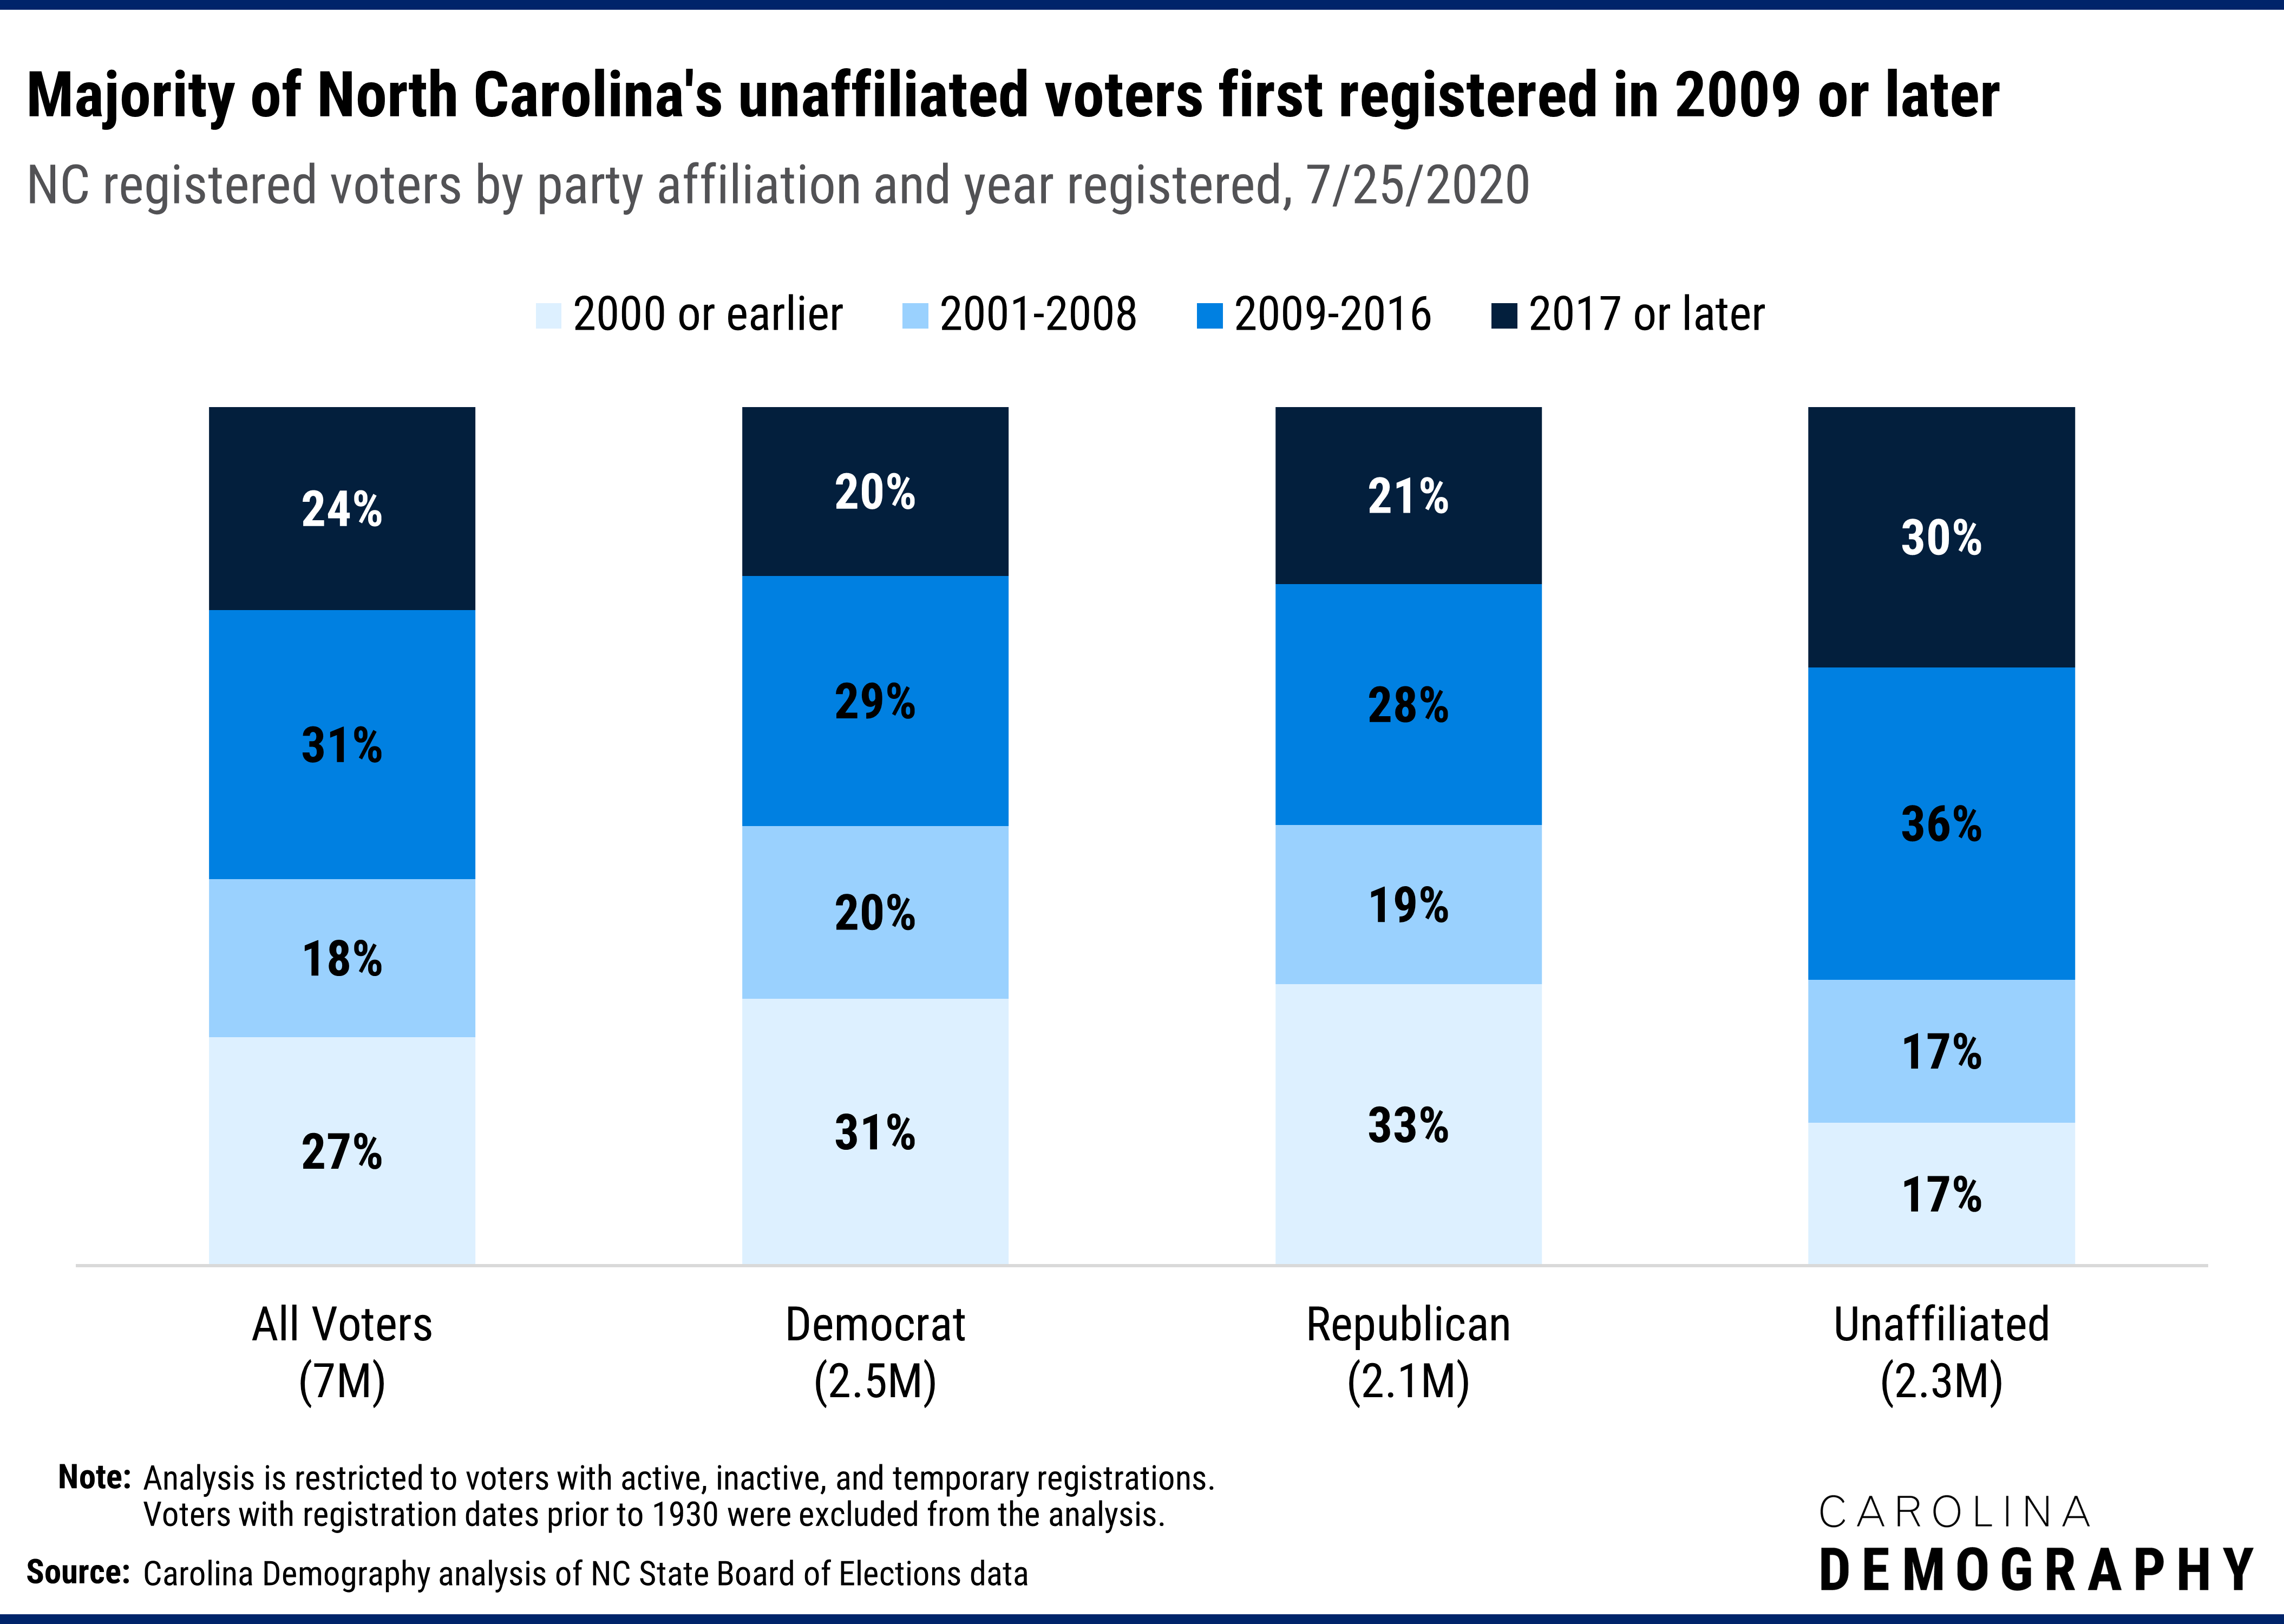 Majority of North Carolina's unaffiliated voters first registered in 2009 or later NC registered voters by party affiliation and year registered, 7/25/2020. Two-thirds of unaffiliated voters first registered between either 2009-2016 (36%) or in 2017 or after (30%); less than half of Democrat and Republican voters registered in 2009 or later. This reflects two factors: first, age group differences in partisan affiliation and second, the rise of unaffiliated voters in recent years.